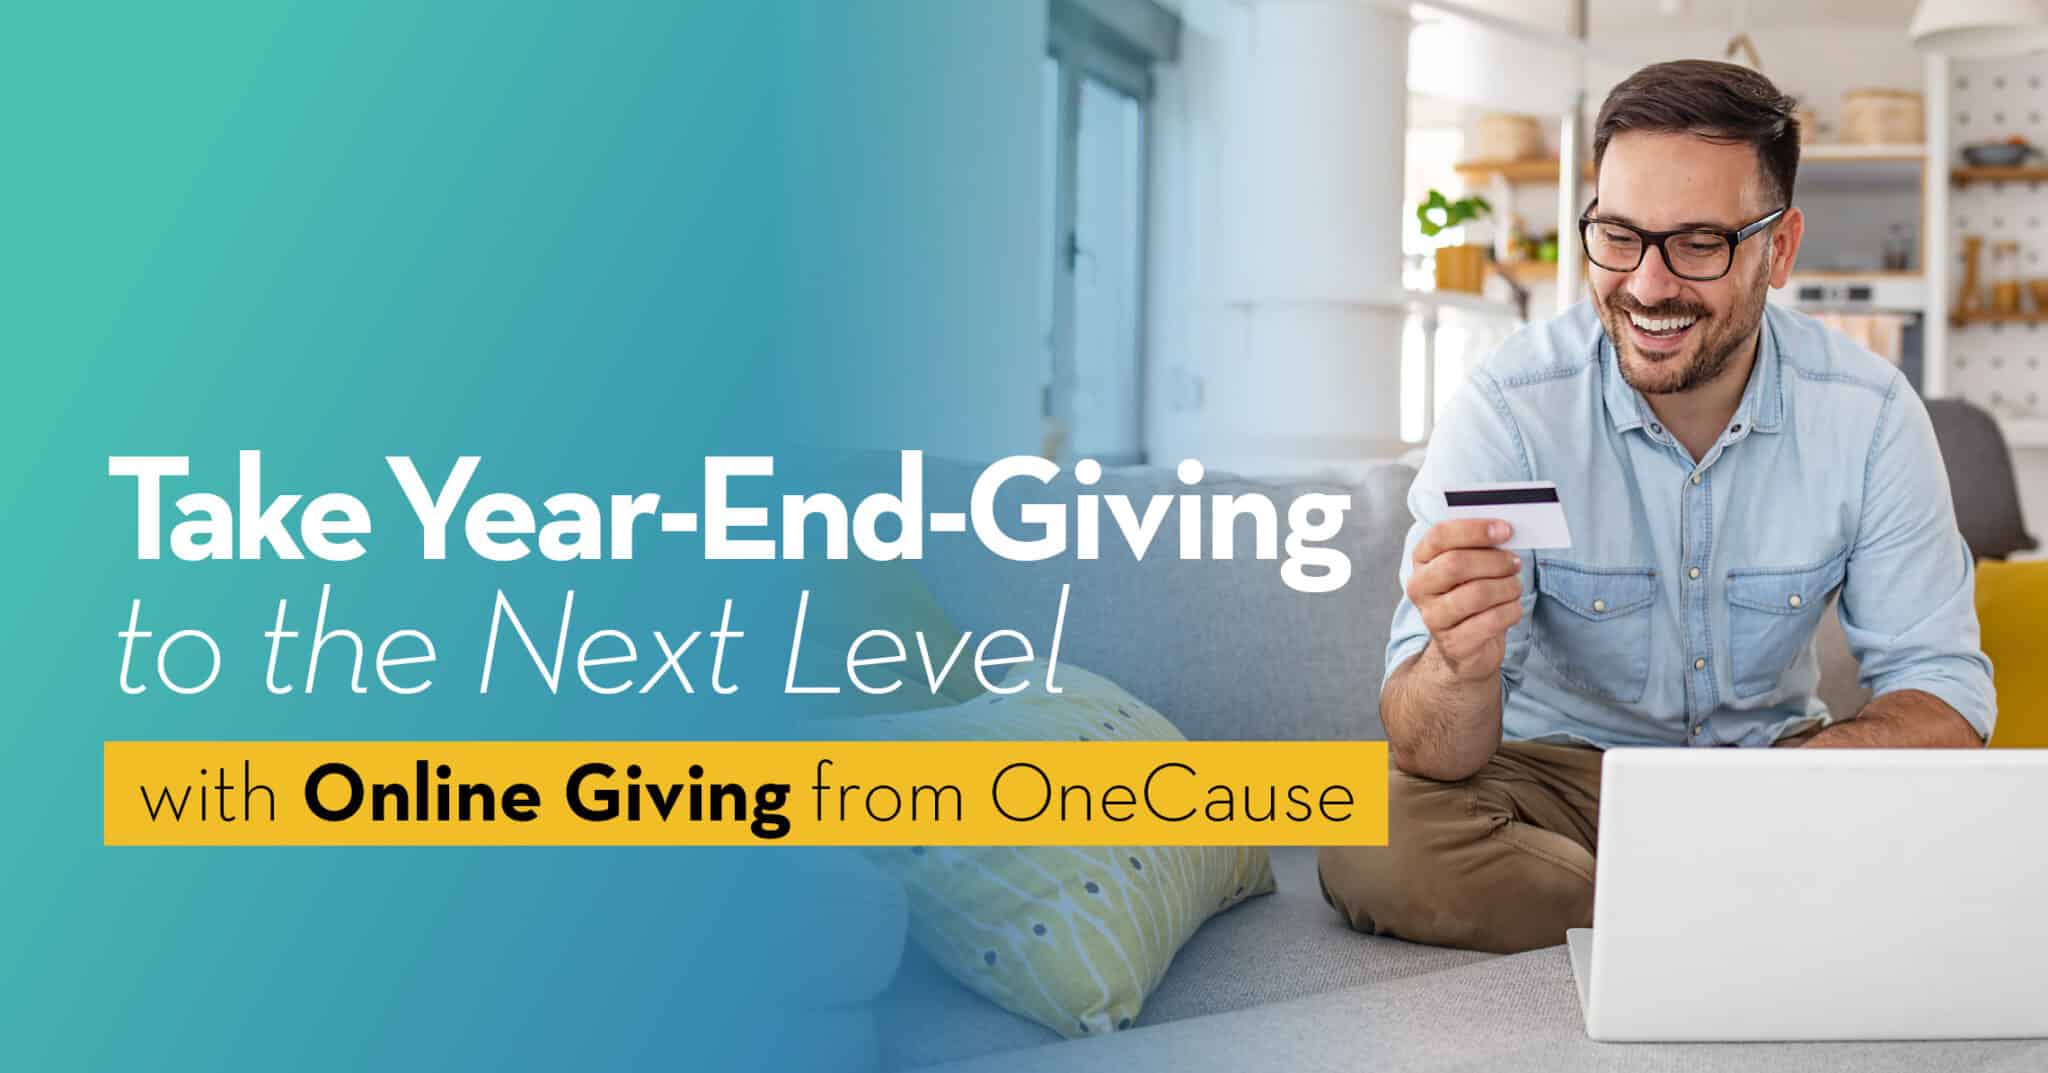 Take Year-End Giving to the Next Level